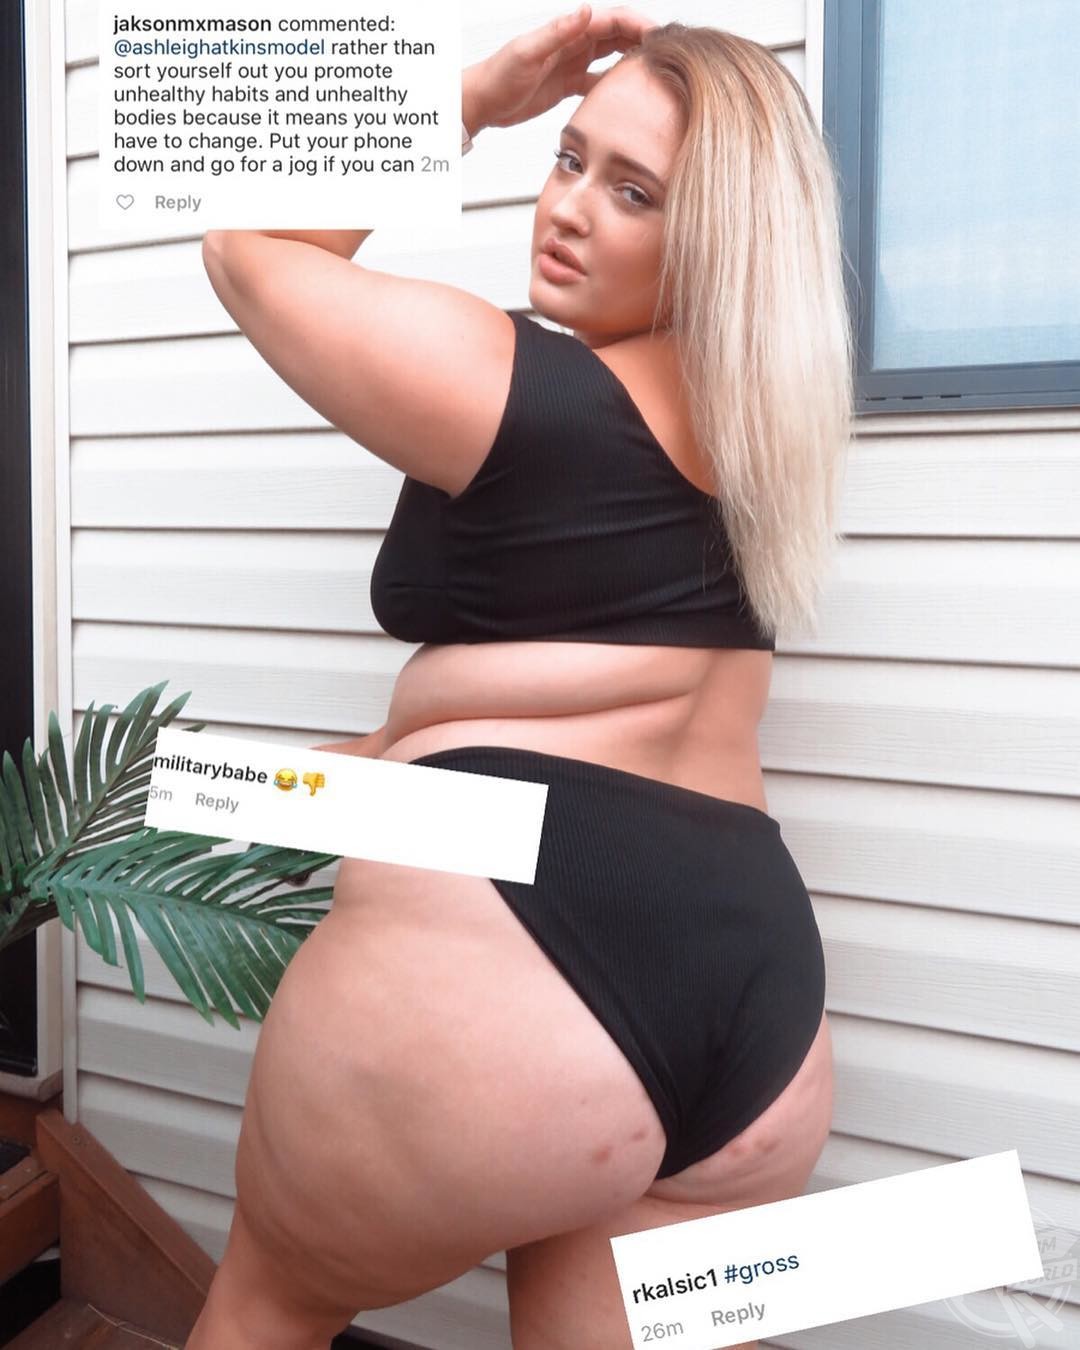 Trolls Wished Cancer On This Plus Size Woman For Sharing Semi Nude Pictures  Online